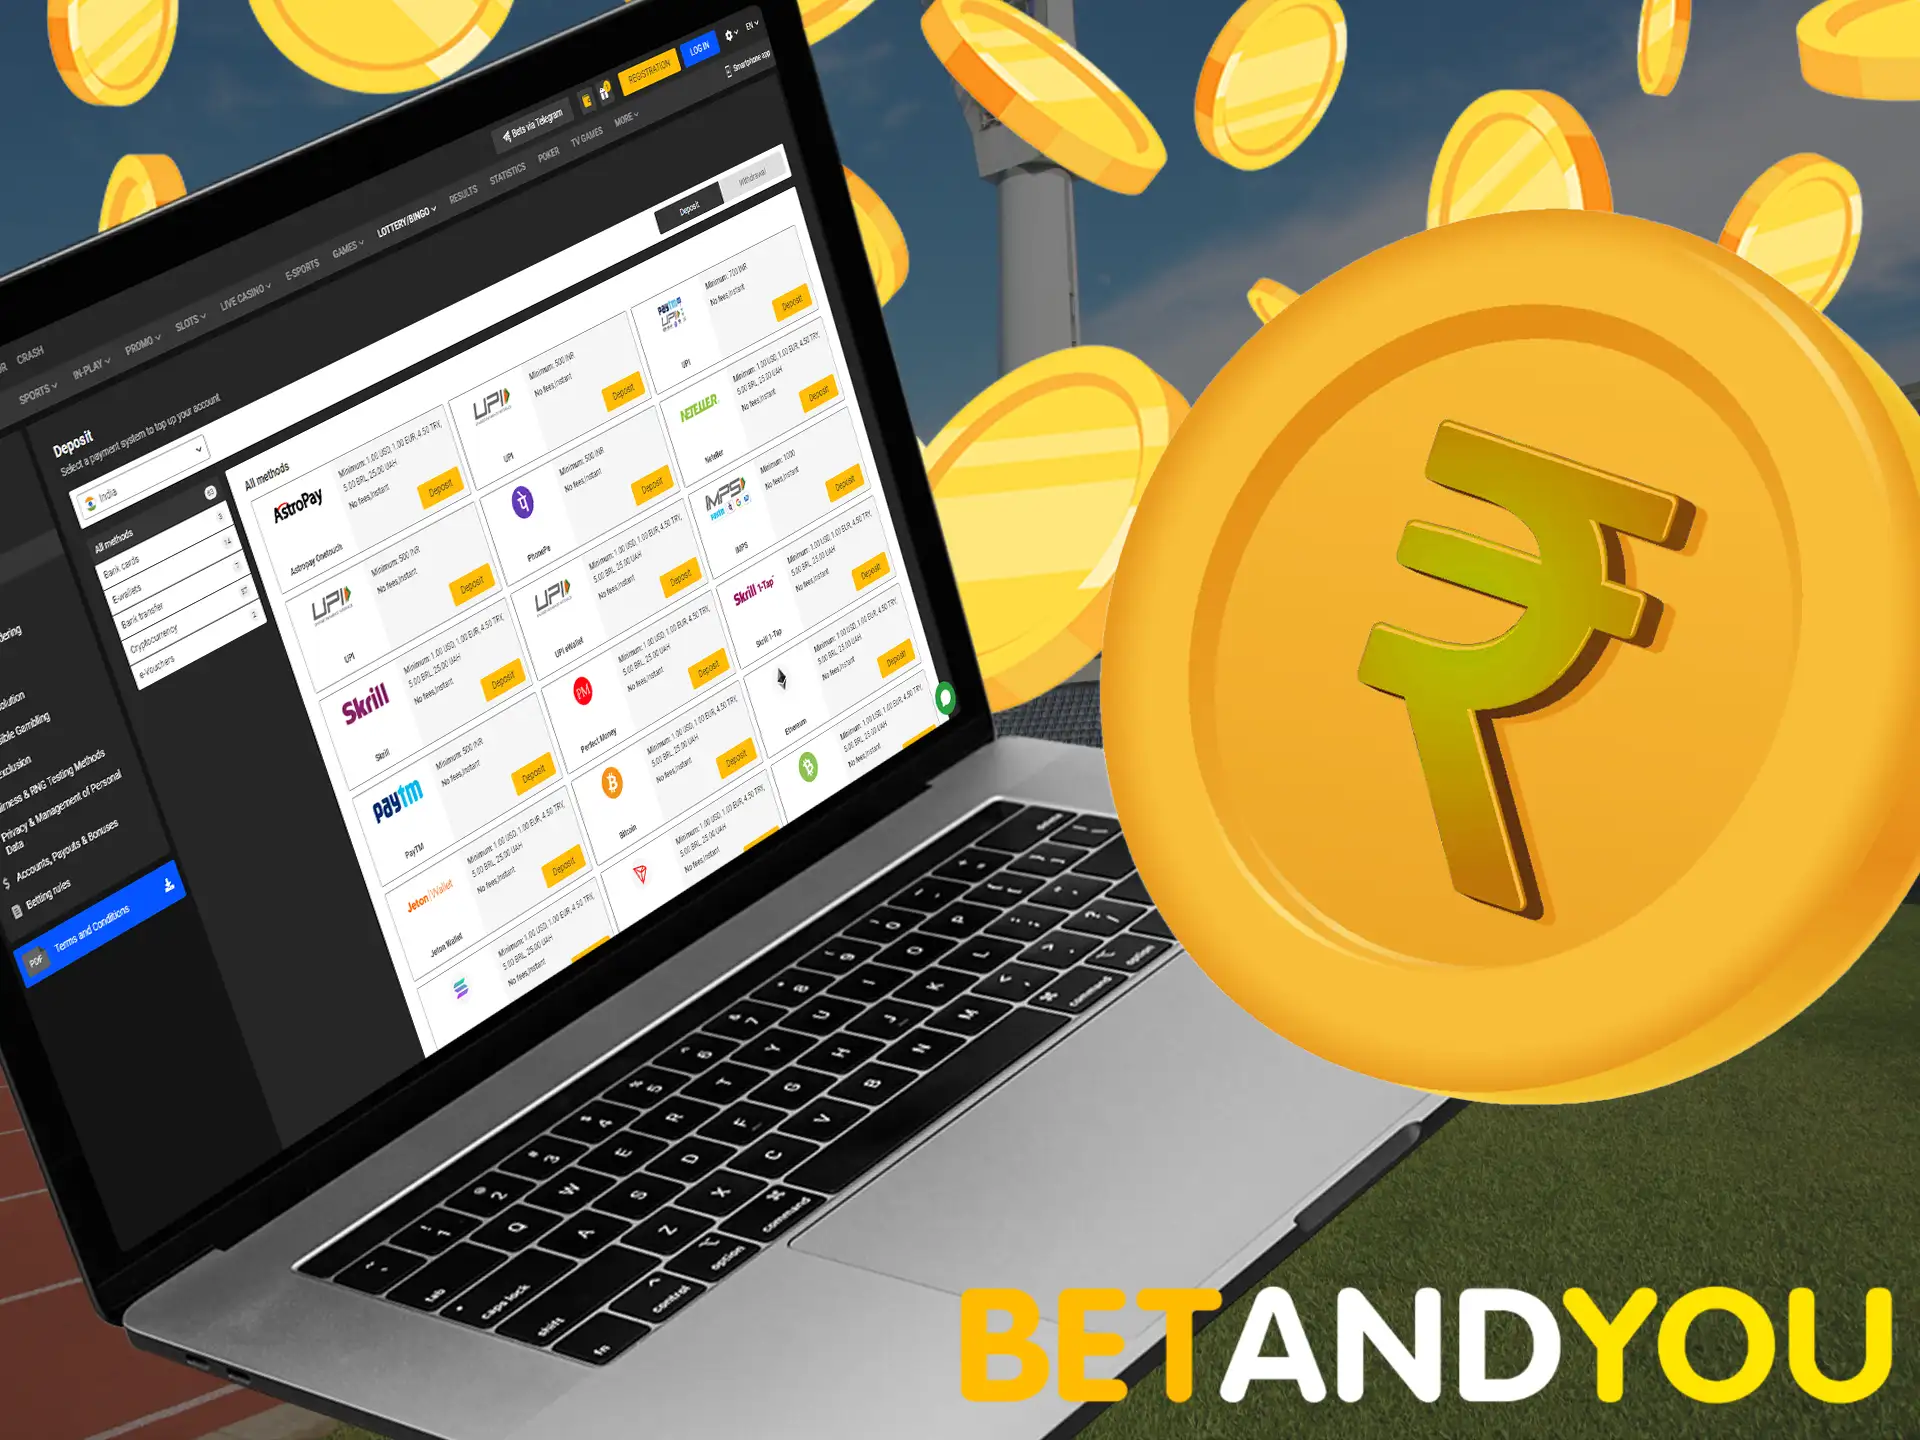 Read the instructions on how to fund your account on the Betandyou gaming platform.